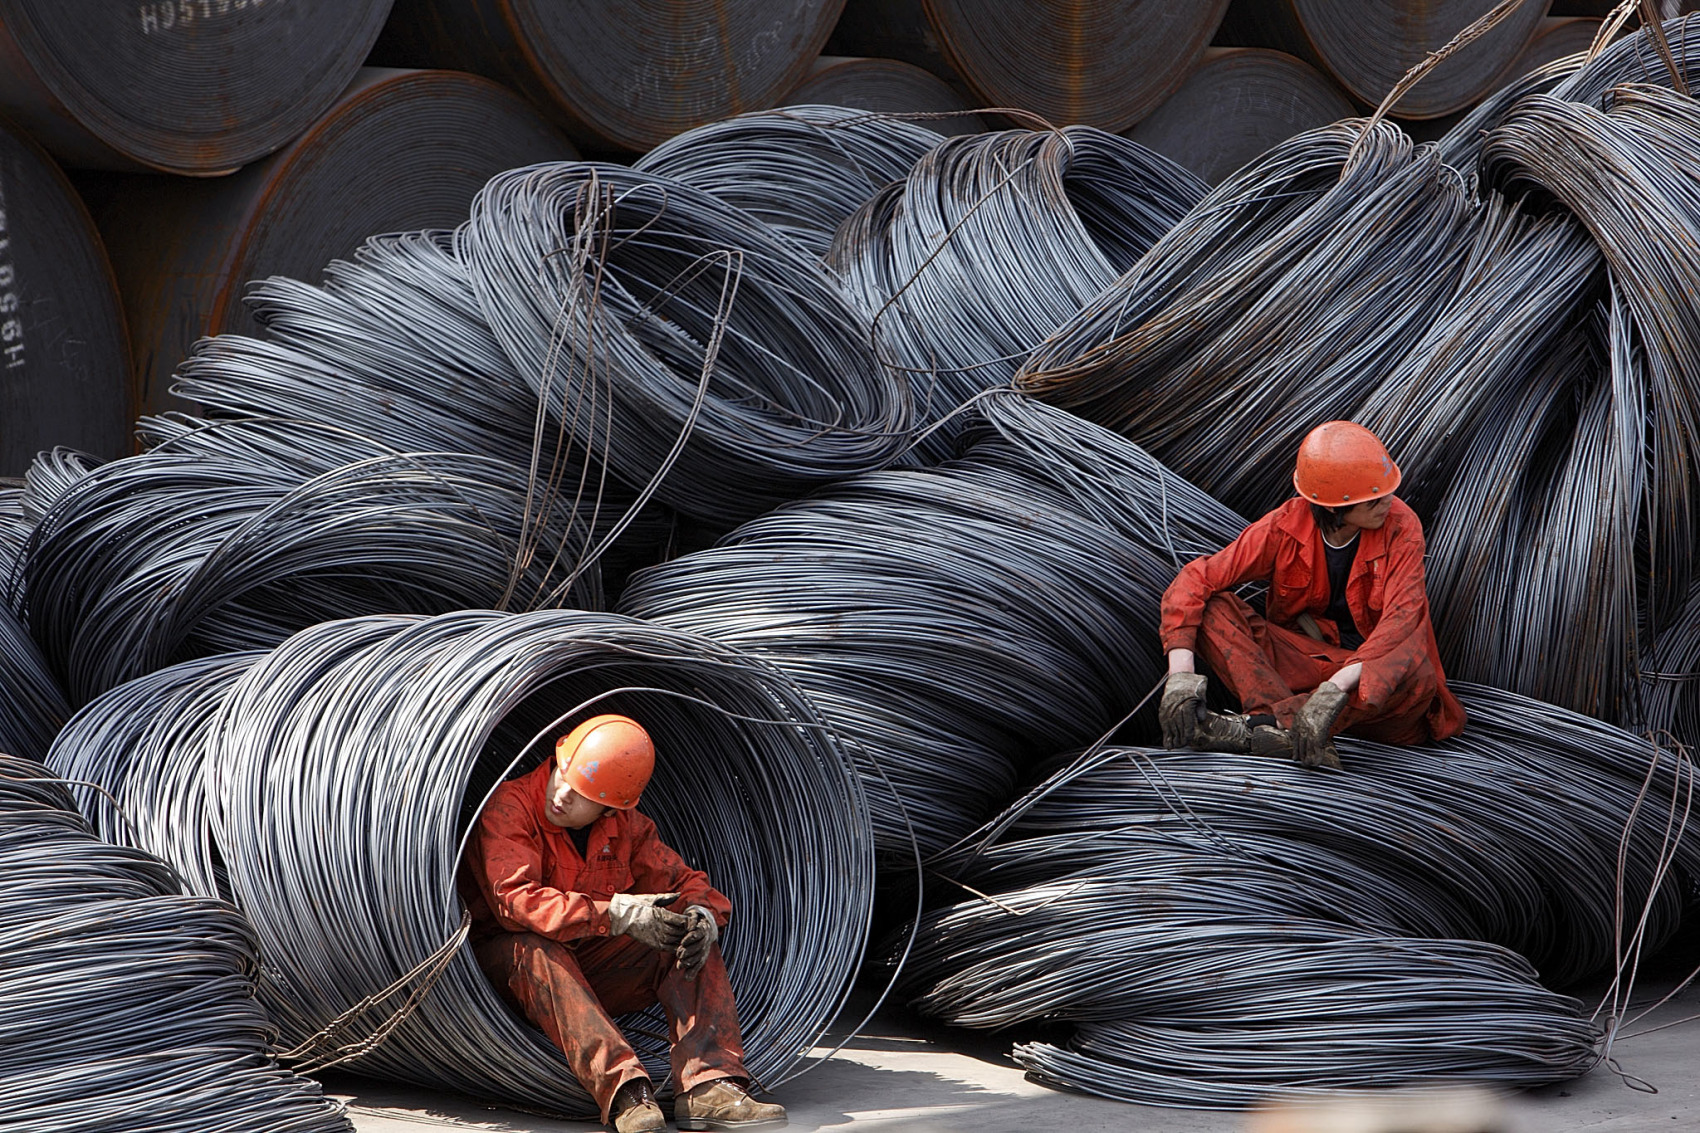 Chinese Steel Is Caught in a Night Trading Dilemma - Bloomberg